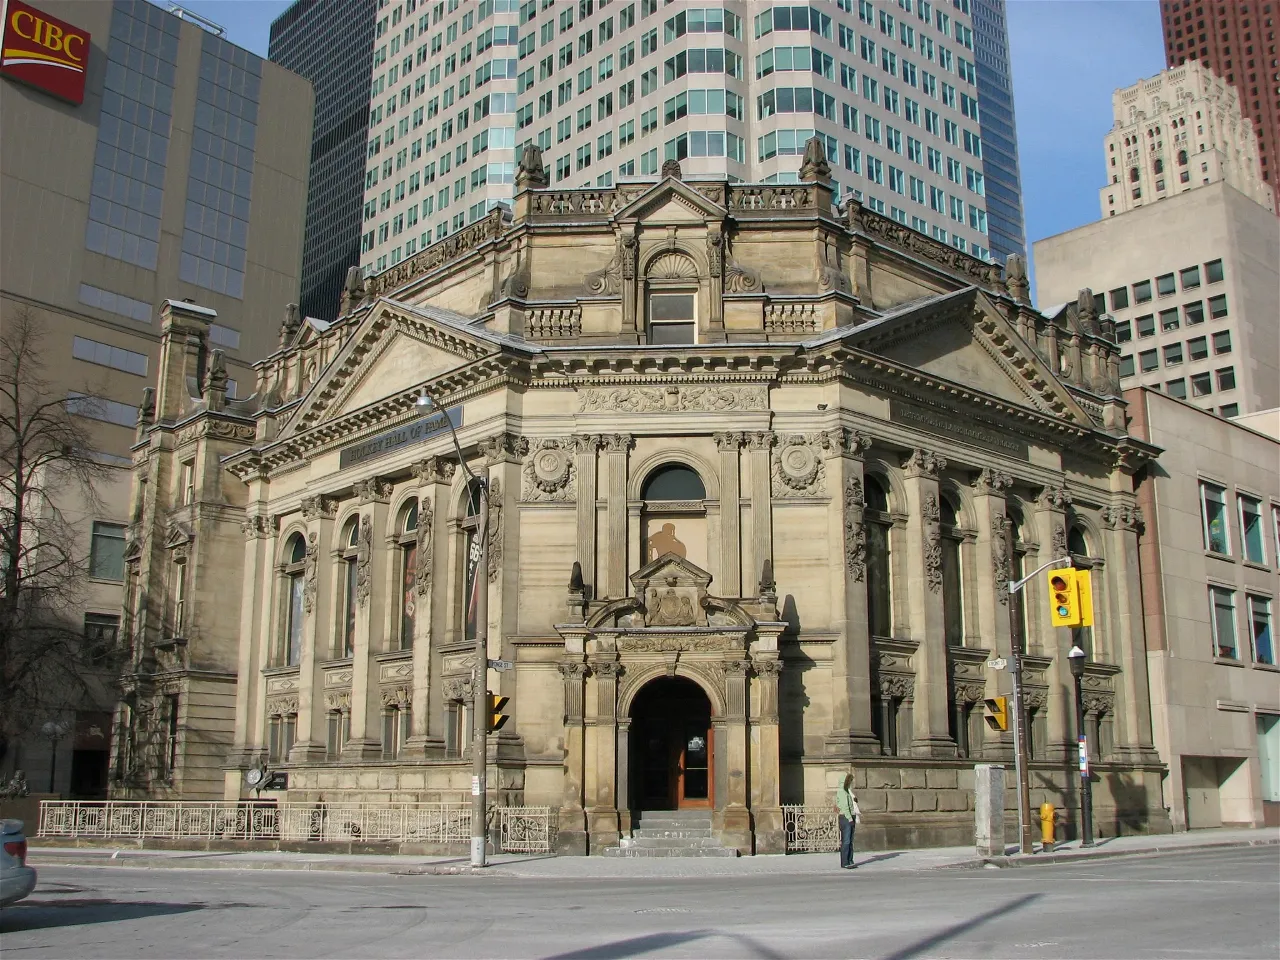 Toronto - Hockey Hall of Fame - Helpful Information for new